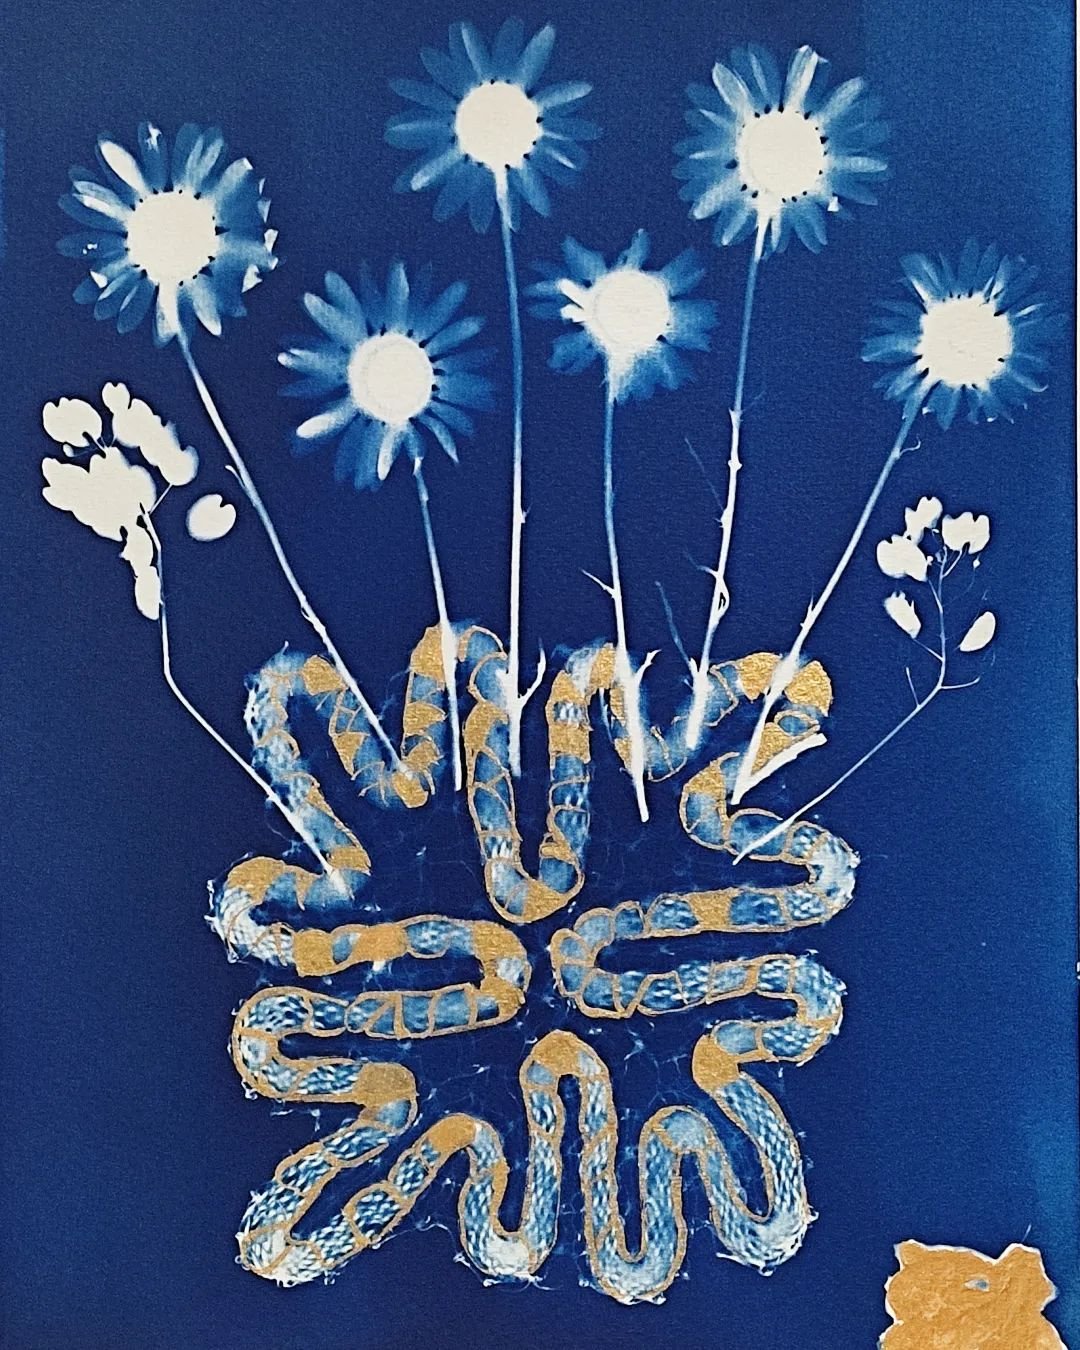 Art Term Tuesday: Cyanotype – From the Fort Wayne Museum of Art